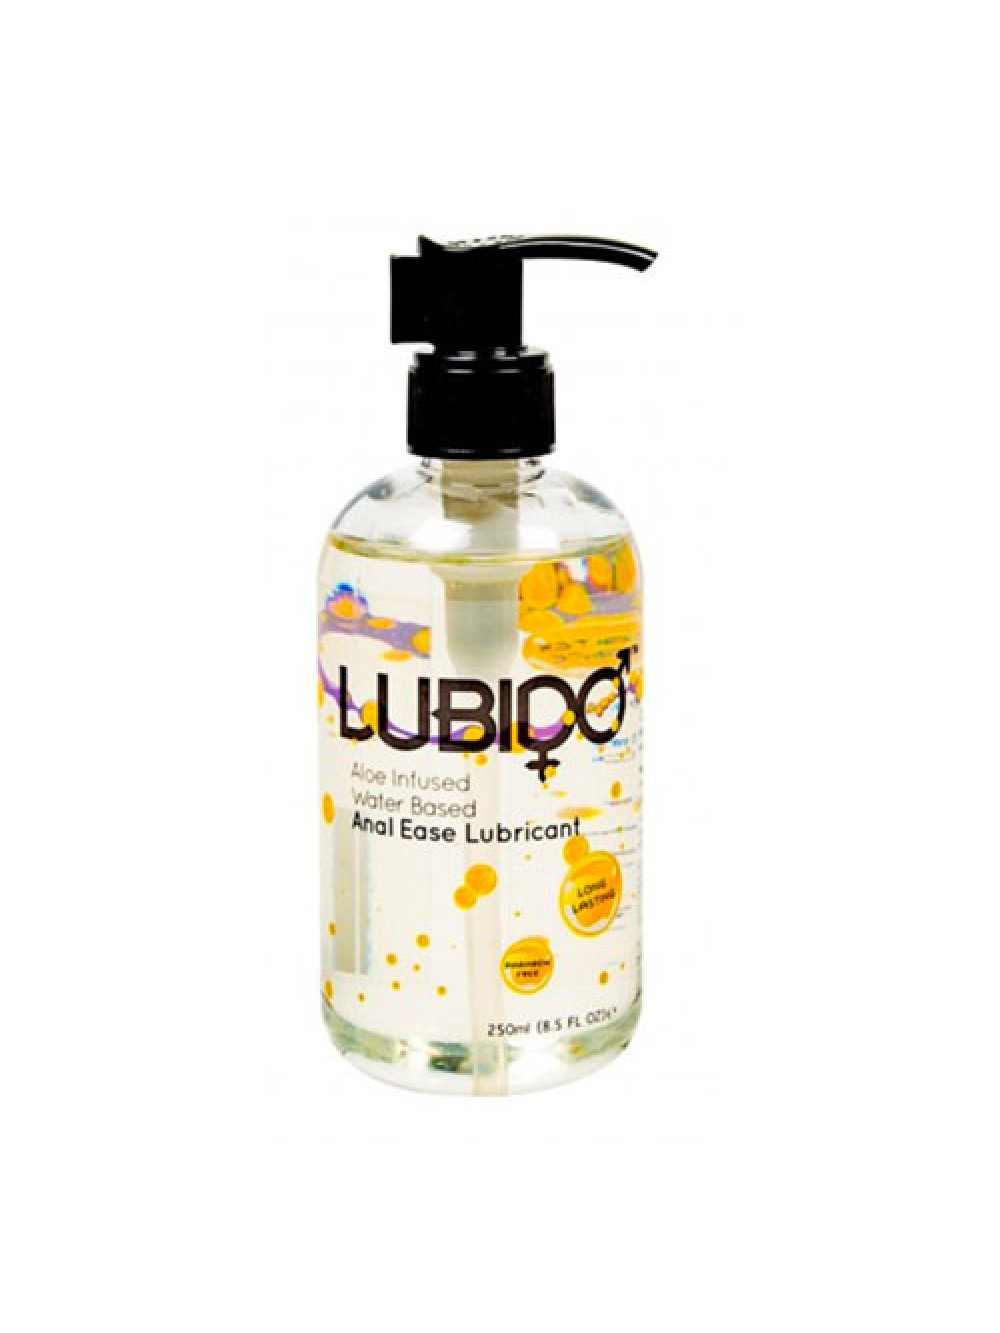 Lubido Anal 250ml Paraben Free Water Based Lubricant